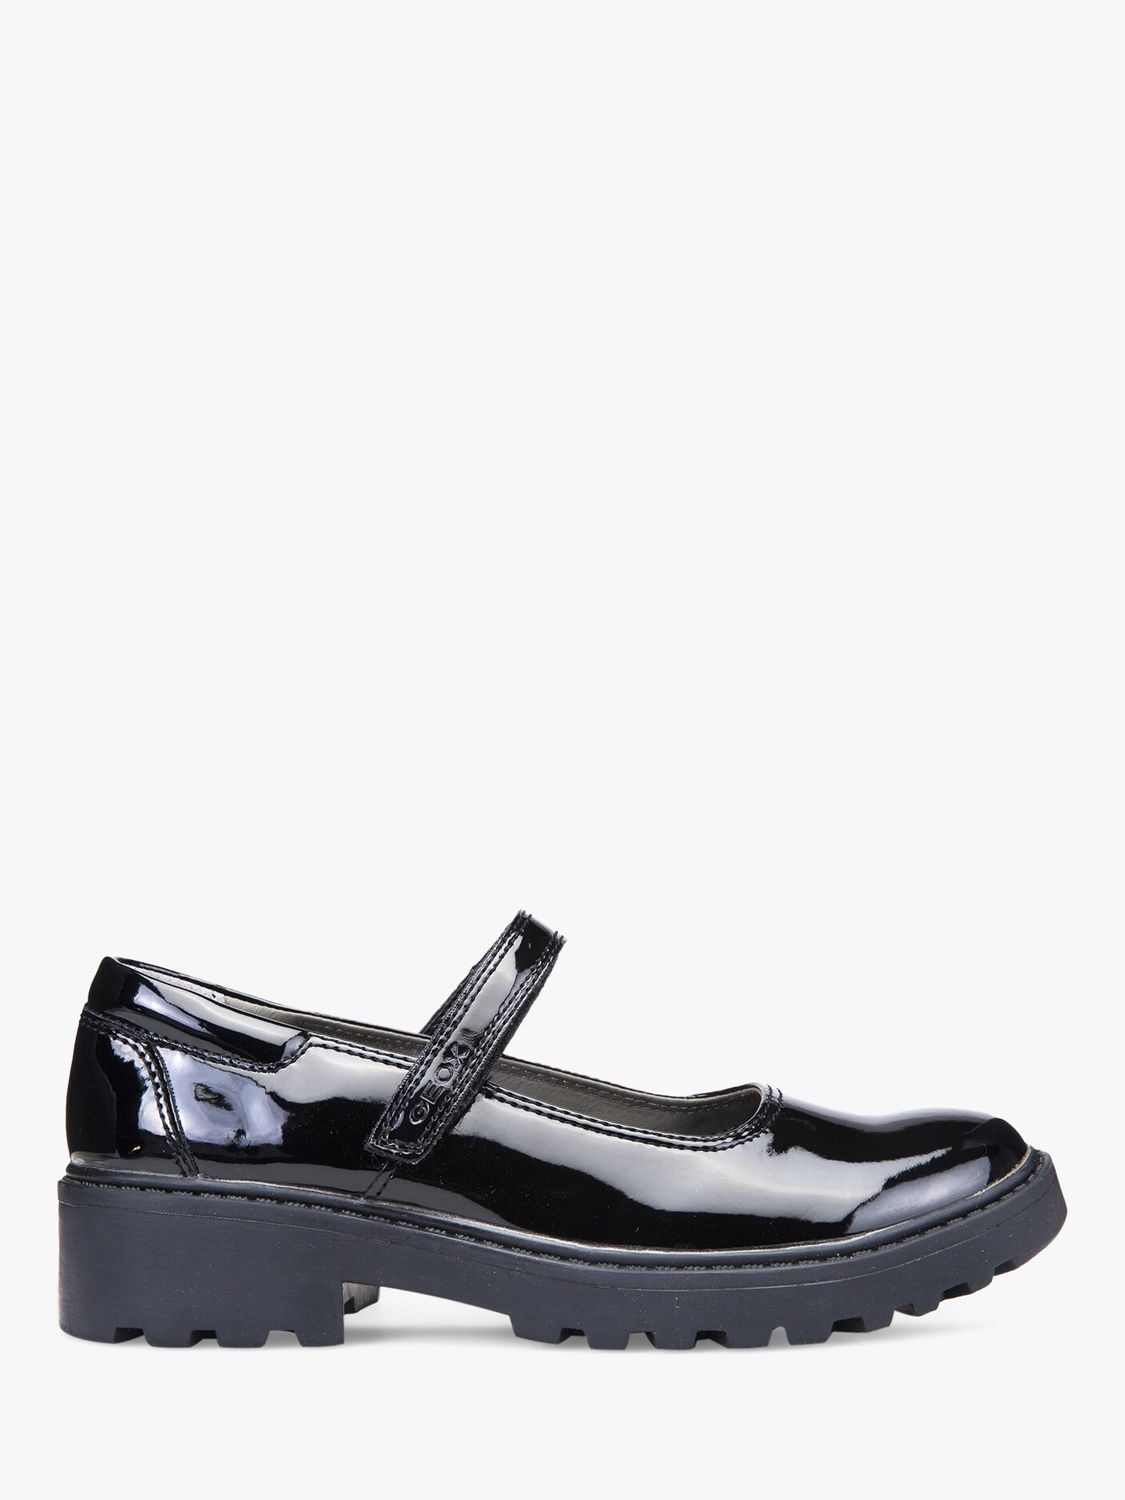 Post impresionismo Histérico Macadán Geox Kids' Casey MJ Leather School Shoes, Black Patent at John Lewis &  Partners